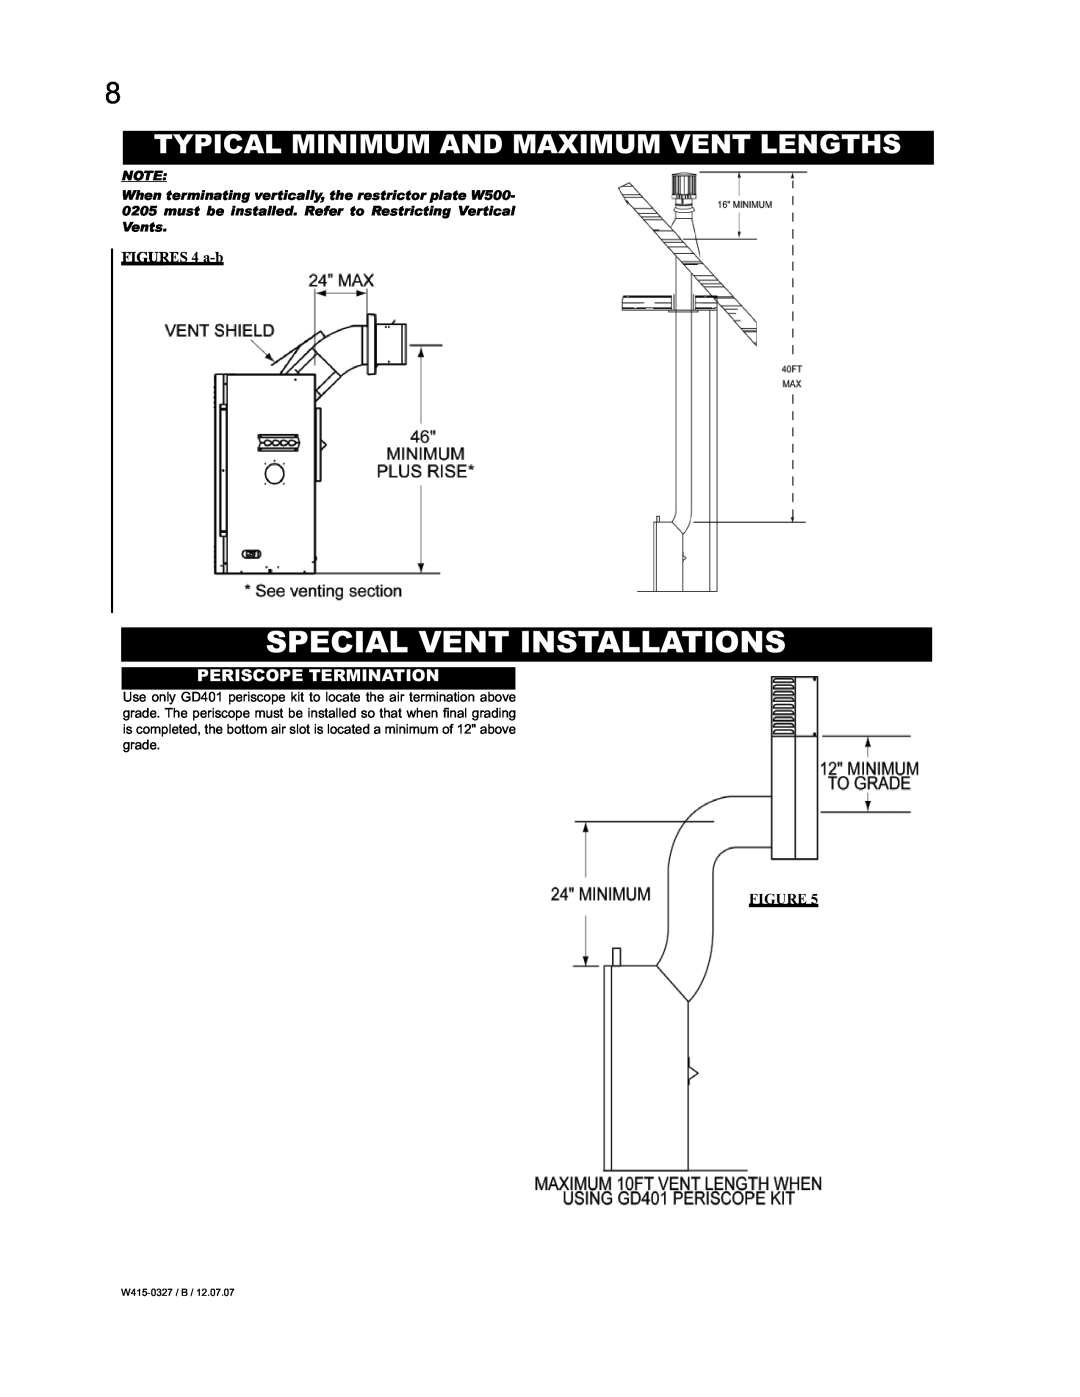 Continental BCDV48P, BCDV48N Special Vent Installations, Typical Minimum And Maximum Vent Lengths, Periscope Termination 